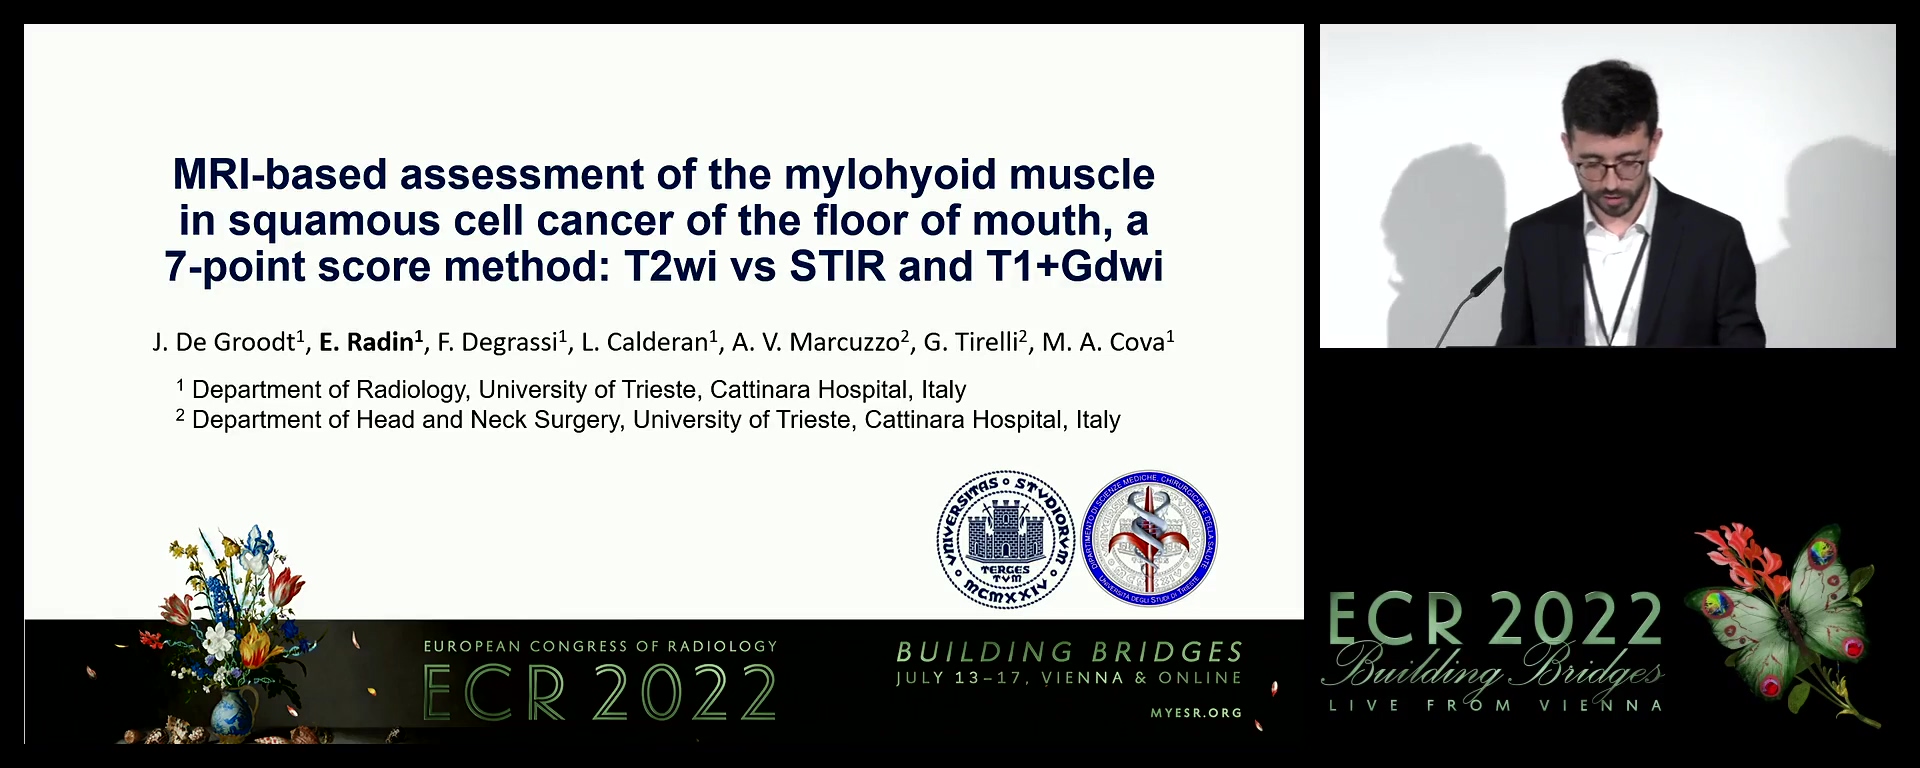 MRI-based assessment of the mylohyoid muscle in squamous cell cancer of the floor of mouth, a 7-point score method: T2wi vs STIR and T1+Gdwi